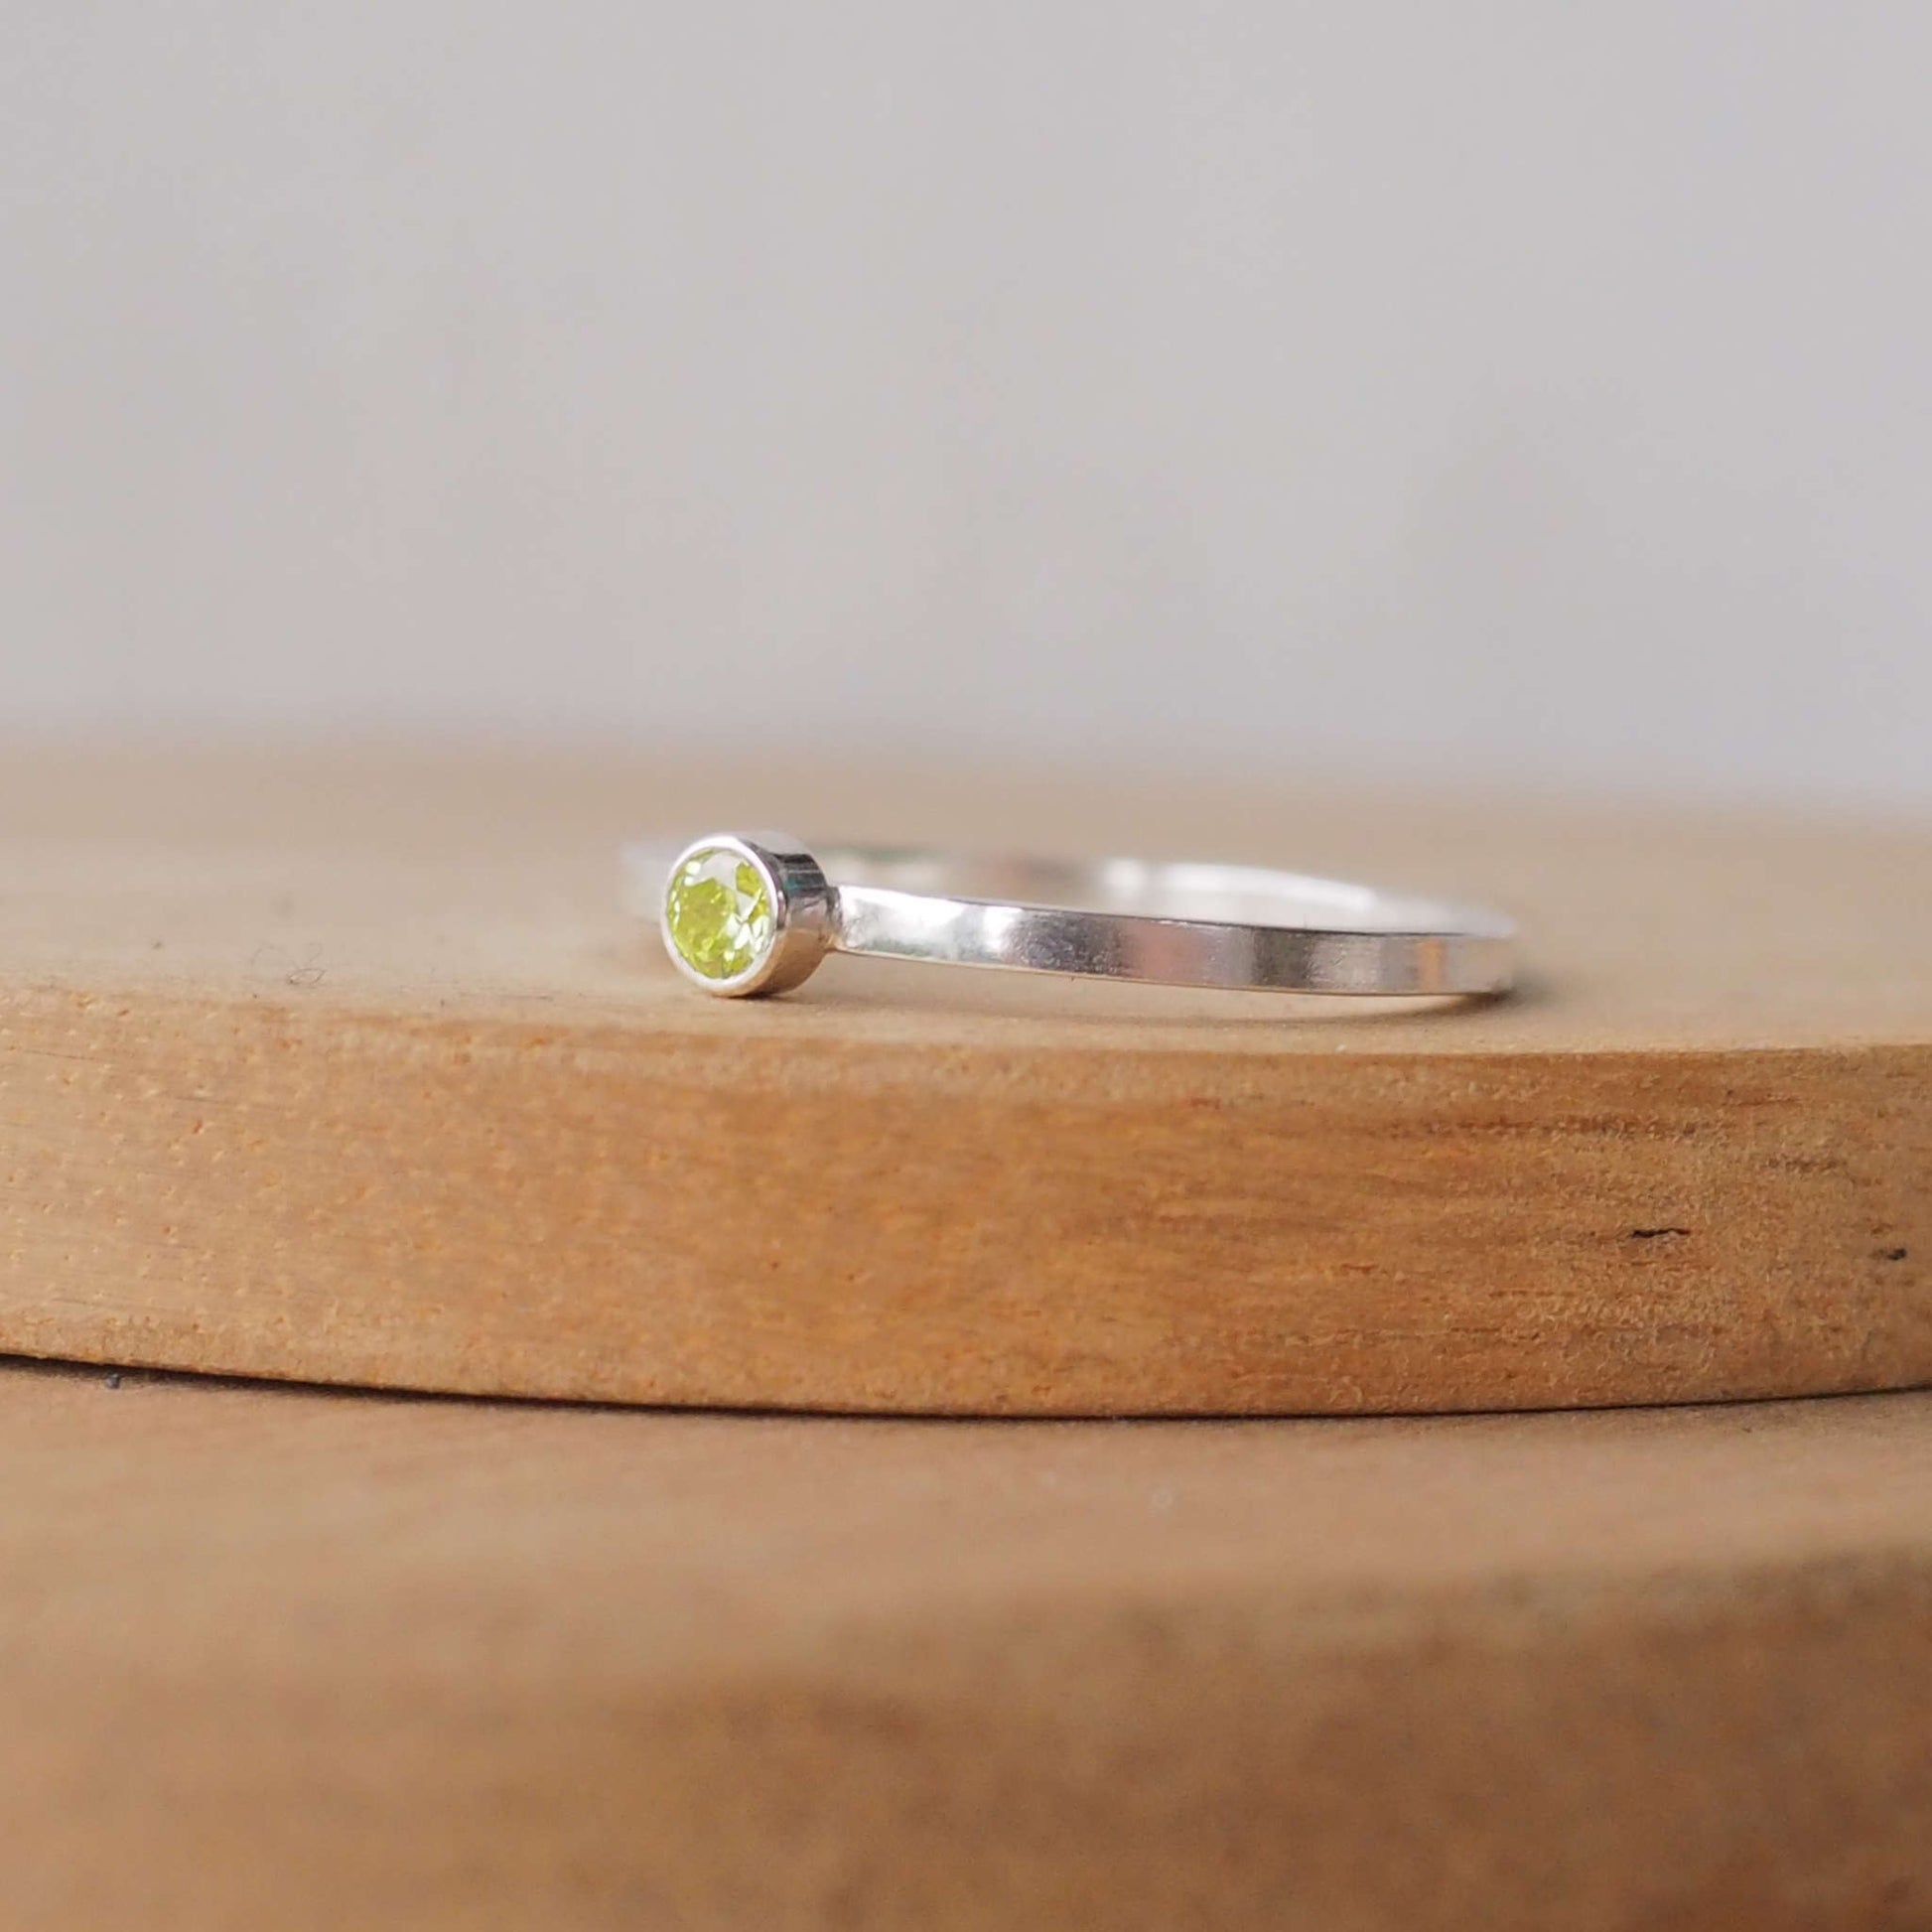 Peridot solitaire ring in a modern style with a simple square band, The ring is made from Sterling Silver and mossy green Cubic zirconia with a 4mm round gemstone fully enclosed in a silver setting. Handmade by maram jewellery in Edinburgh